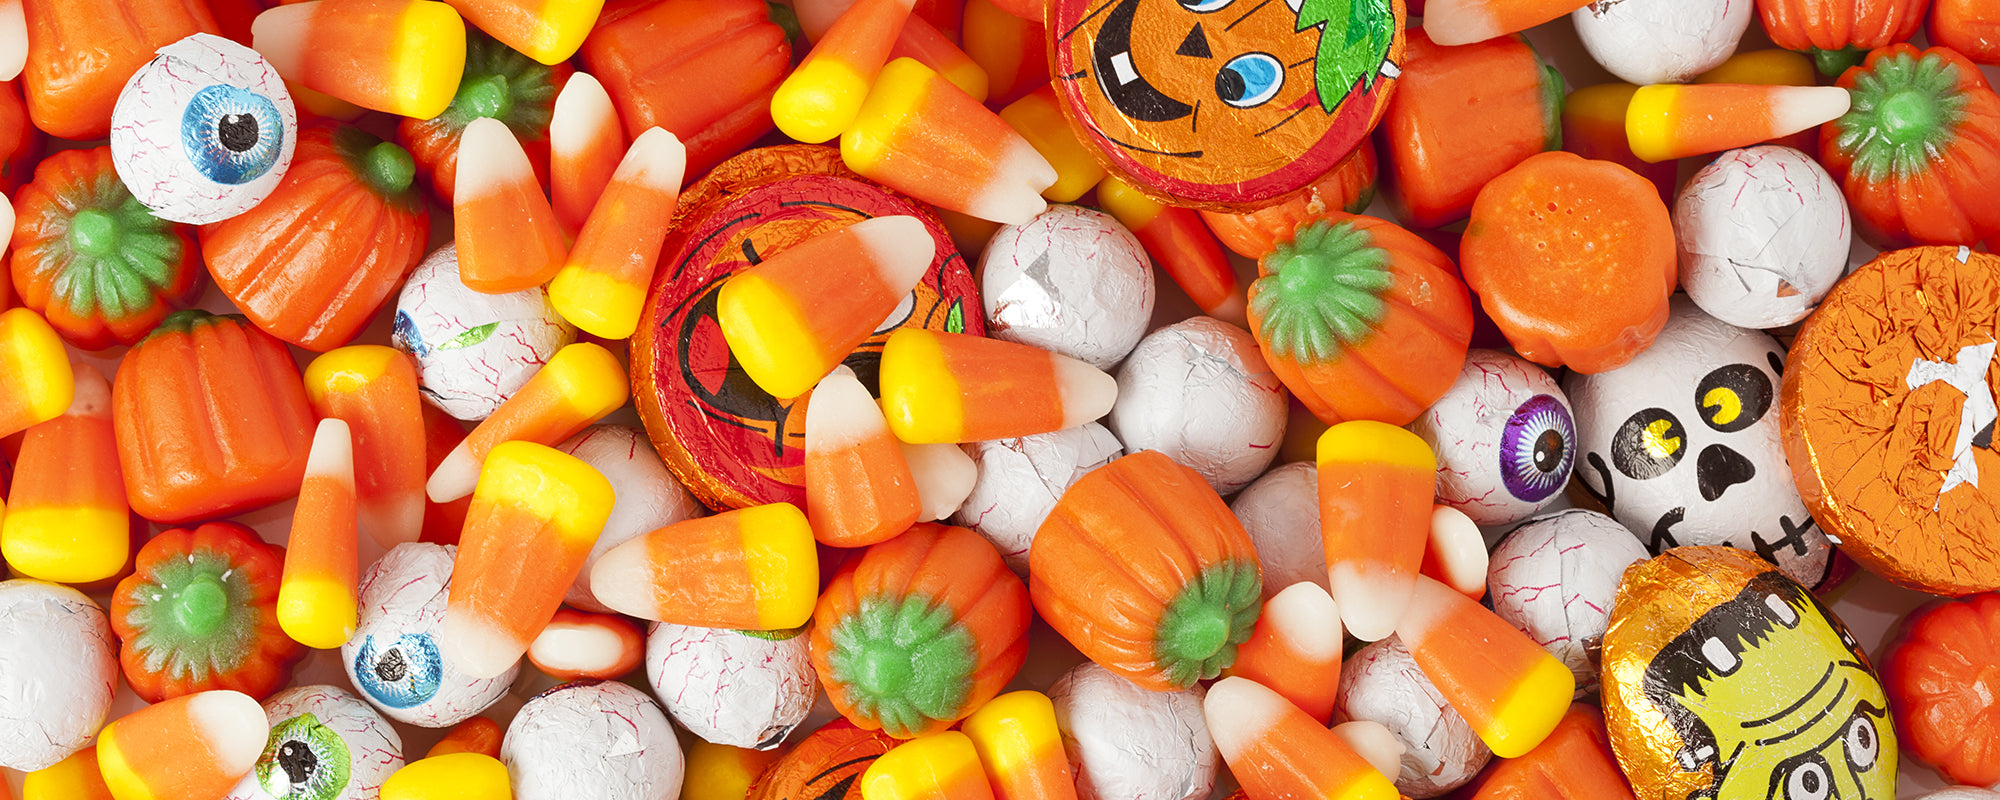 4 Tricks for Choosing the Healthiest Halloween Candy